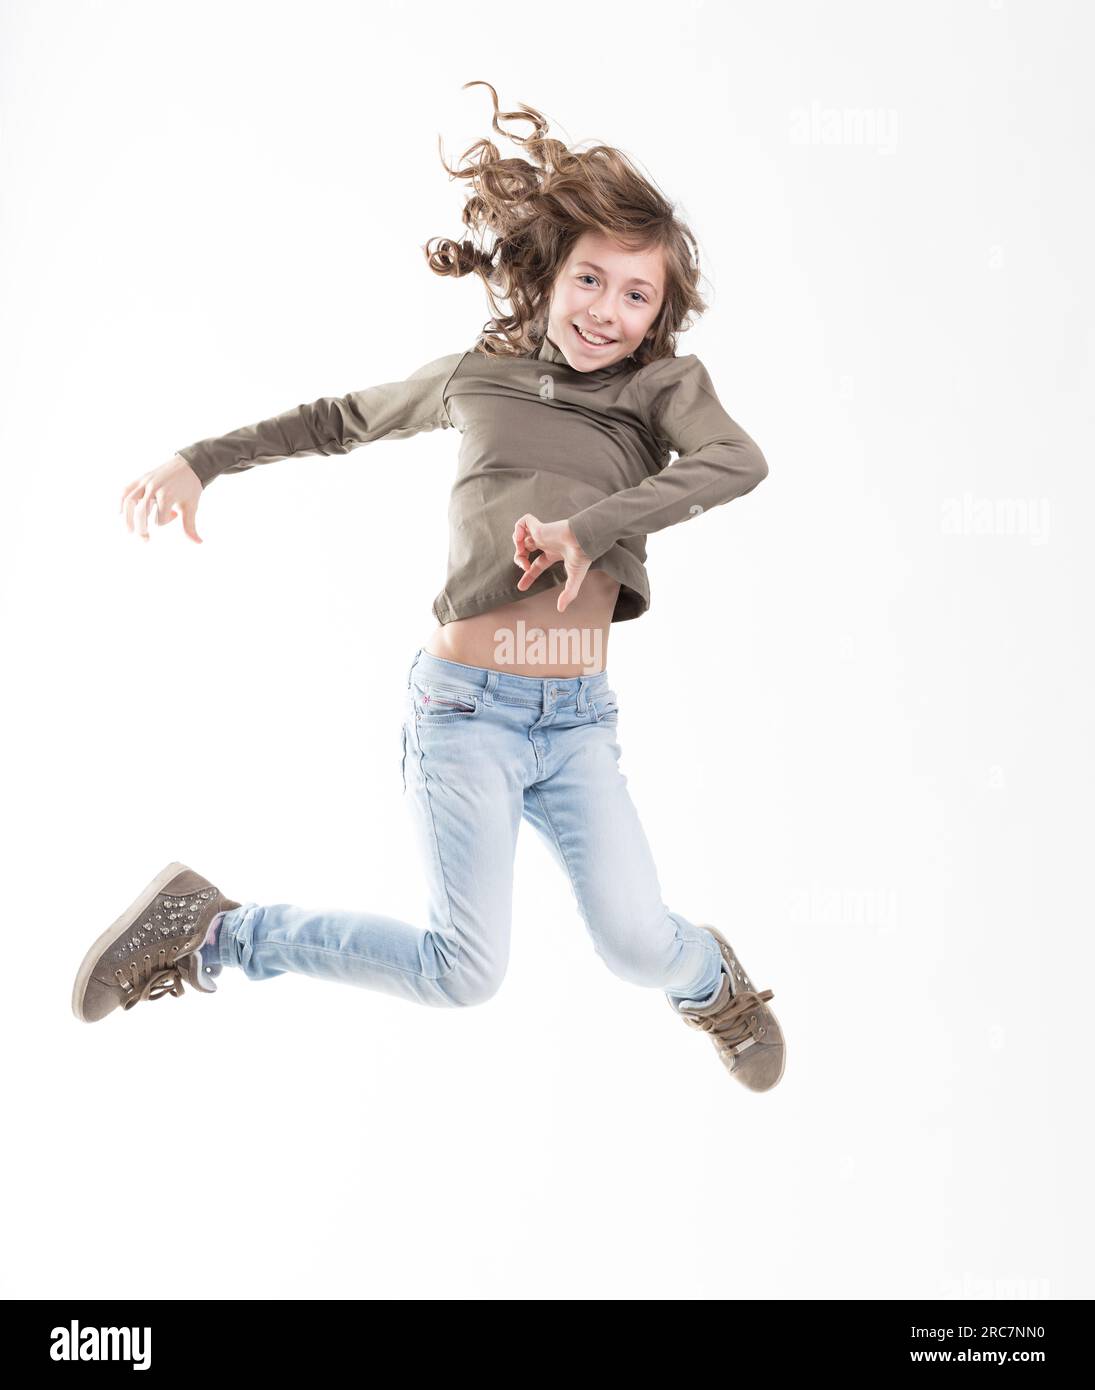 Isolated on white, a brown-curled girl in mid-leap, joy etched on her face. Dressed in blue jeans, green shirt, she loves to fly Stock Photo